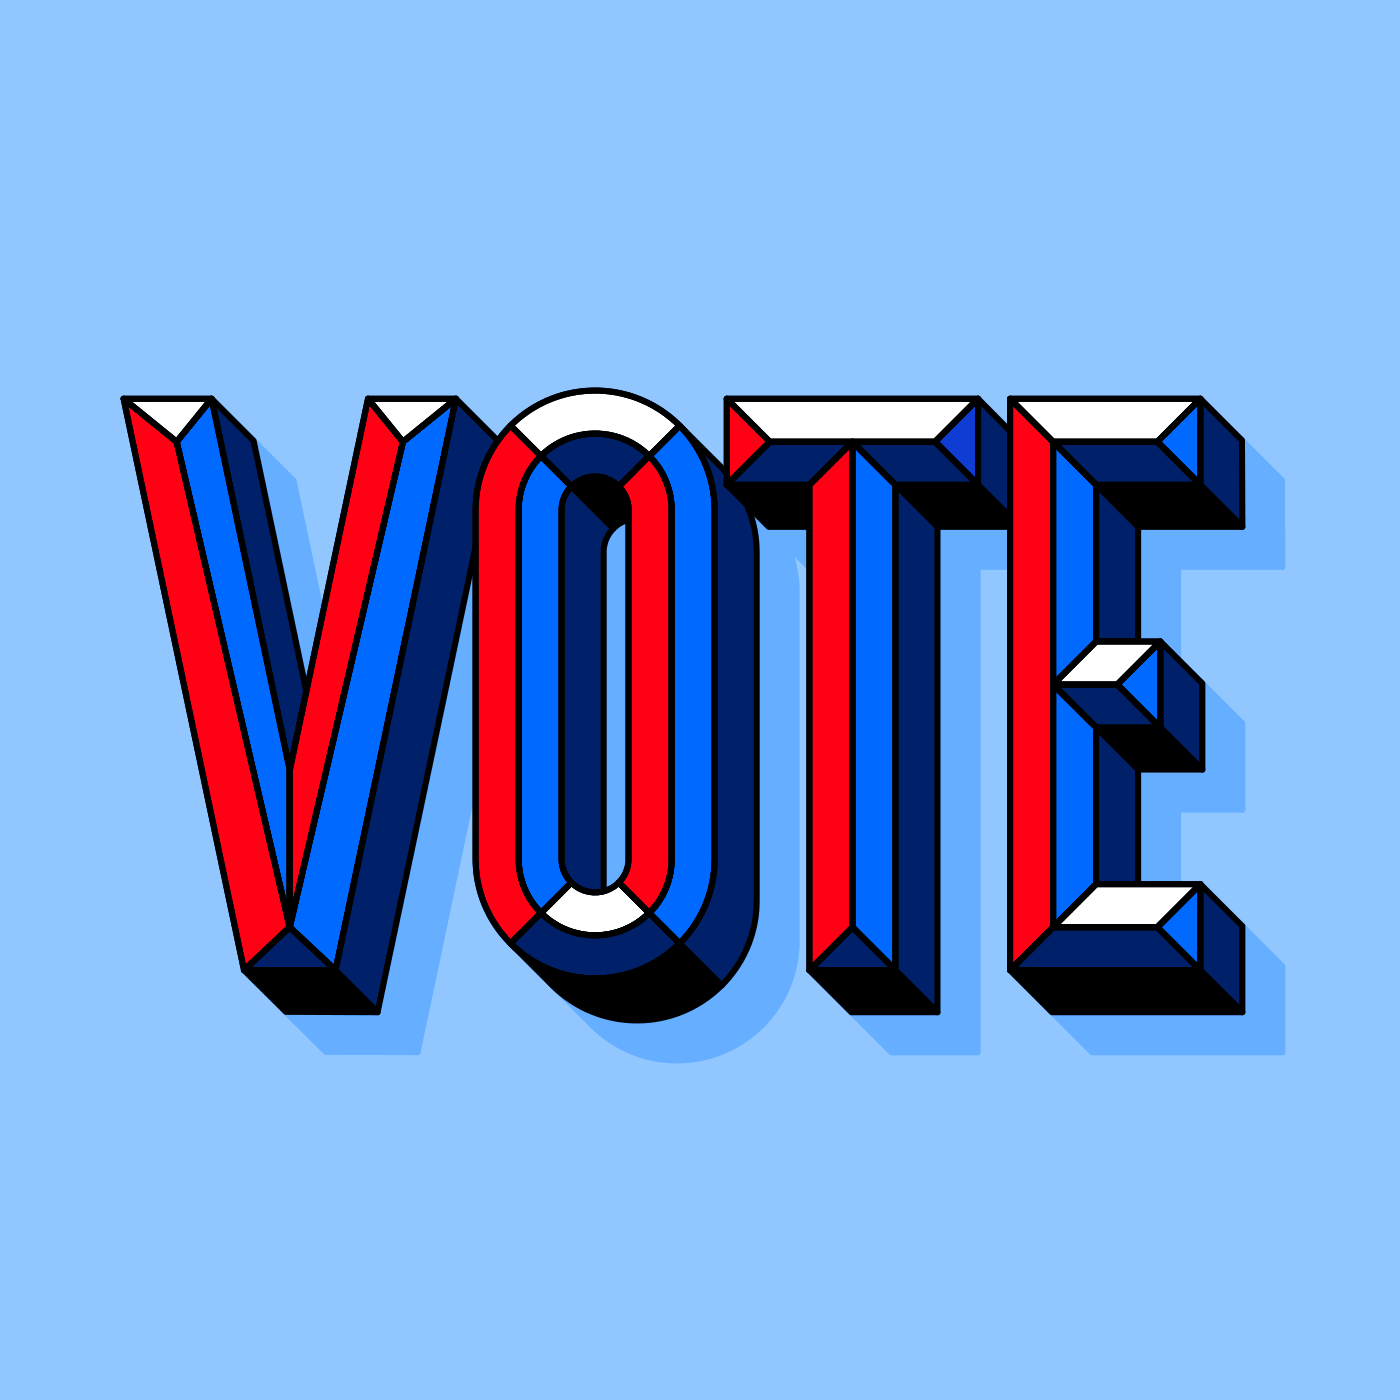 Kinetic Typography - VOTING ART by Mat Voyce